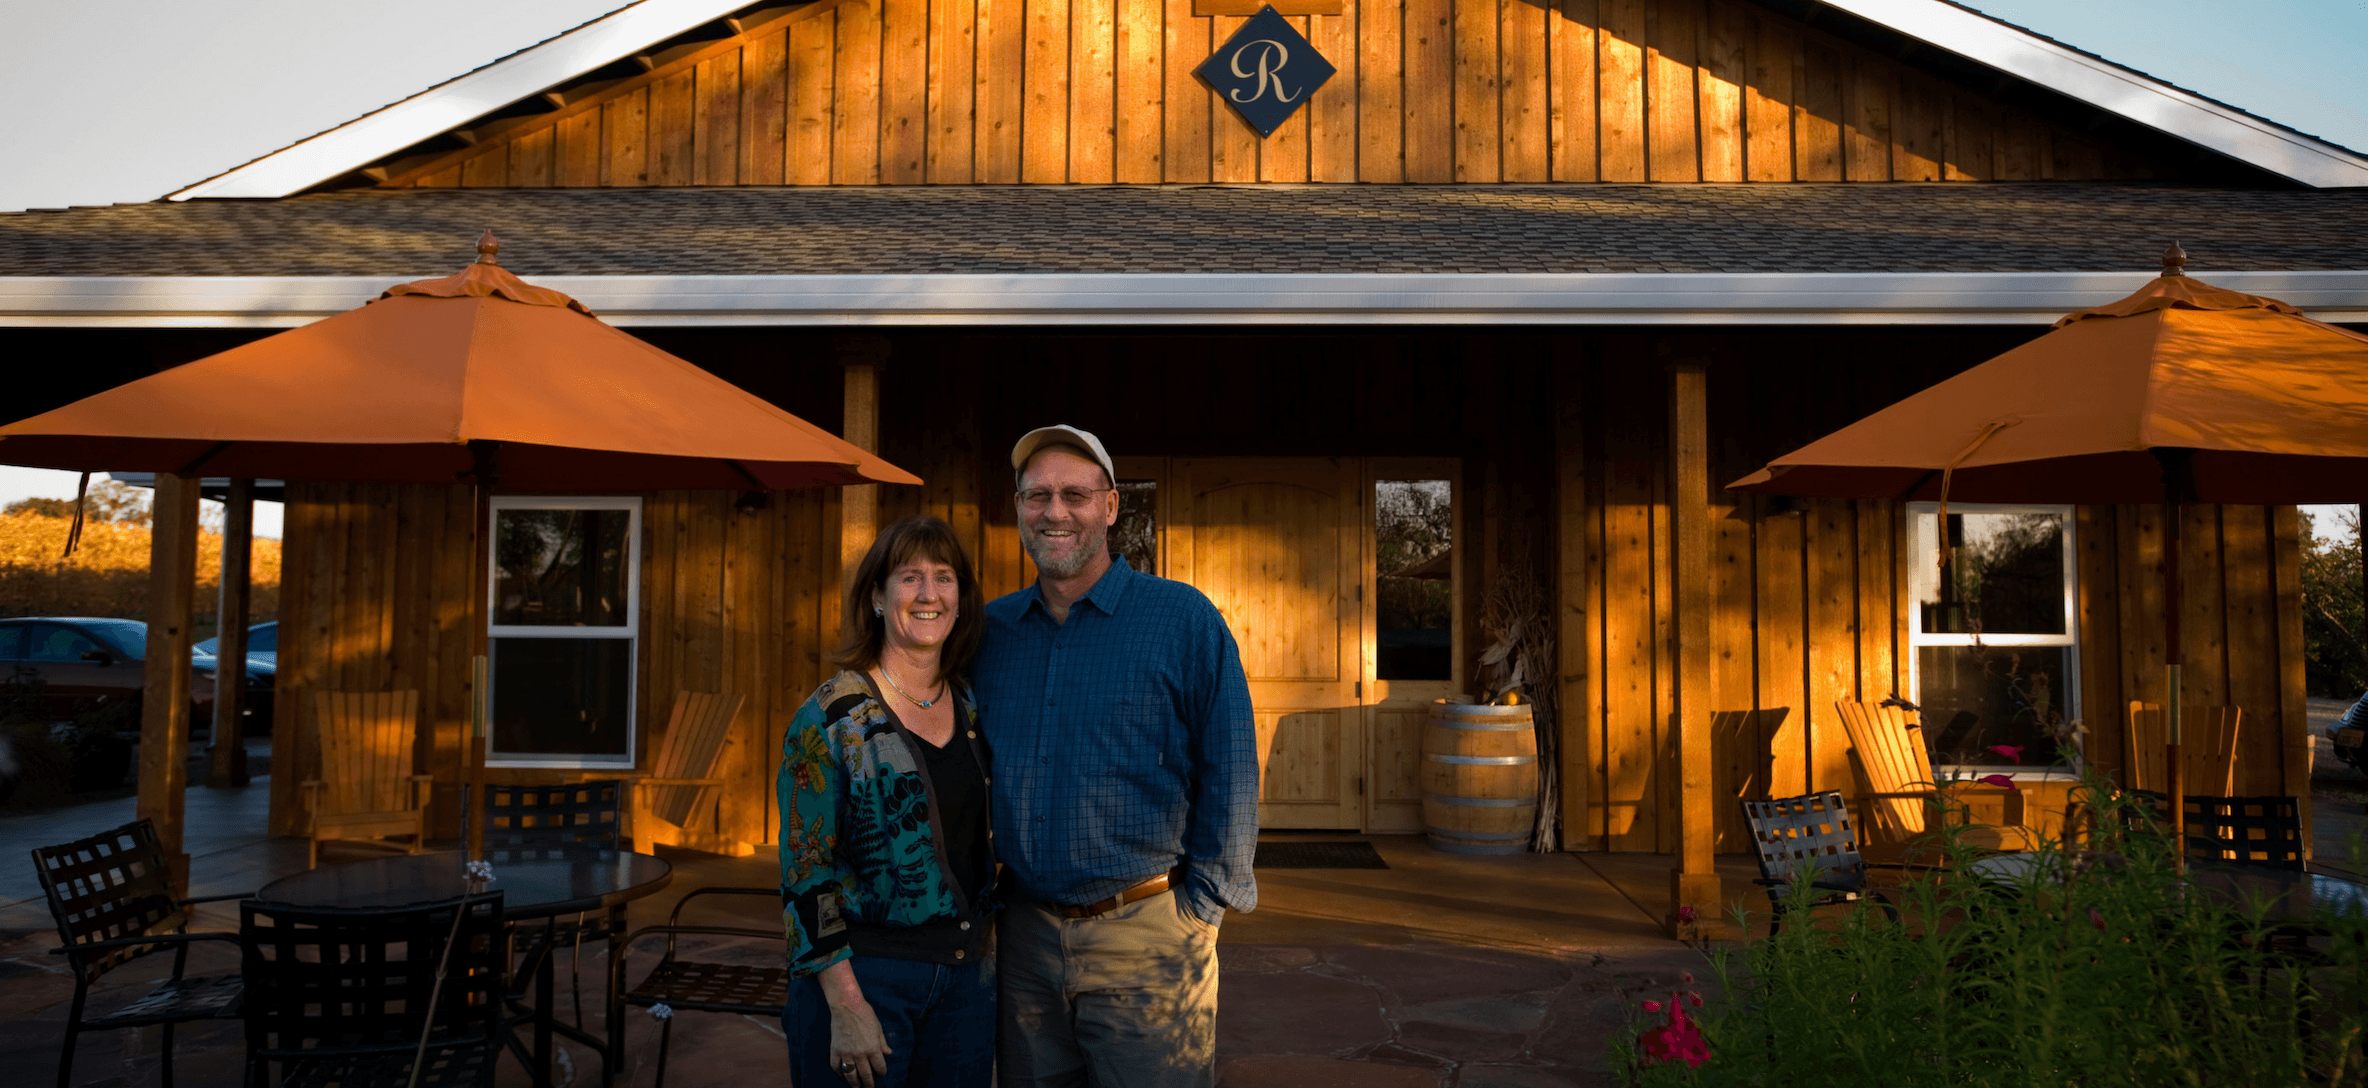 Jeff Runquist Wines - The heart of Amador County, home of California's oldest vineyards